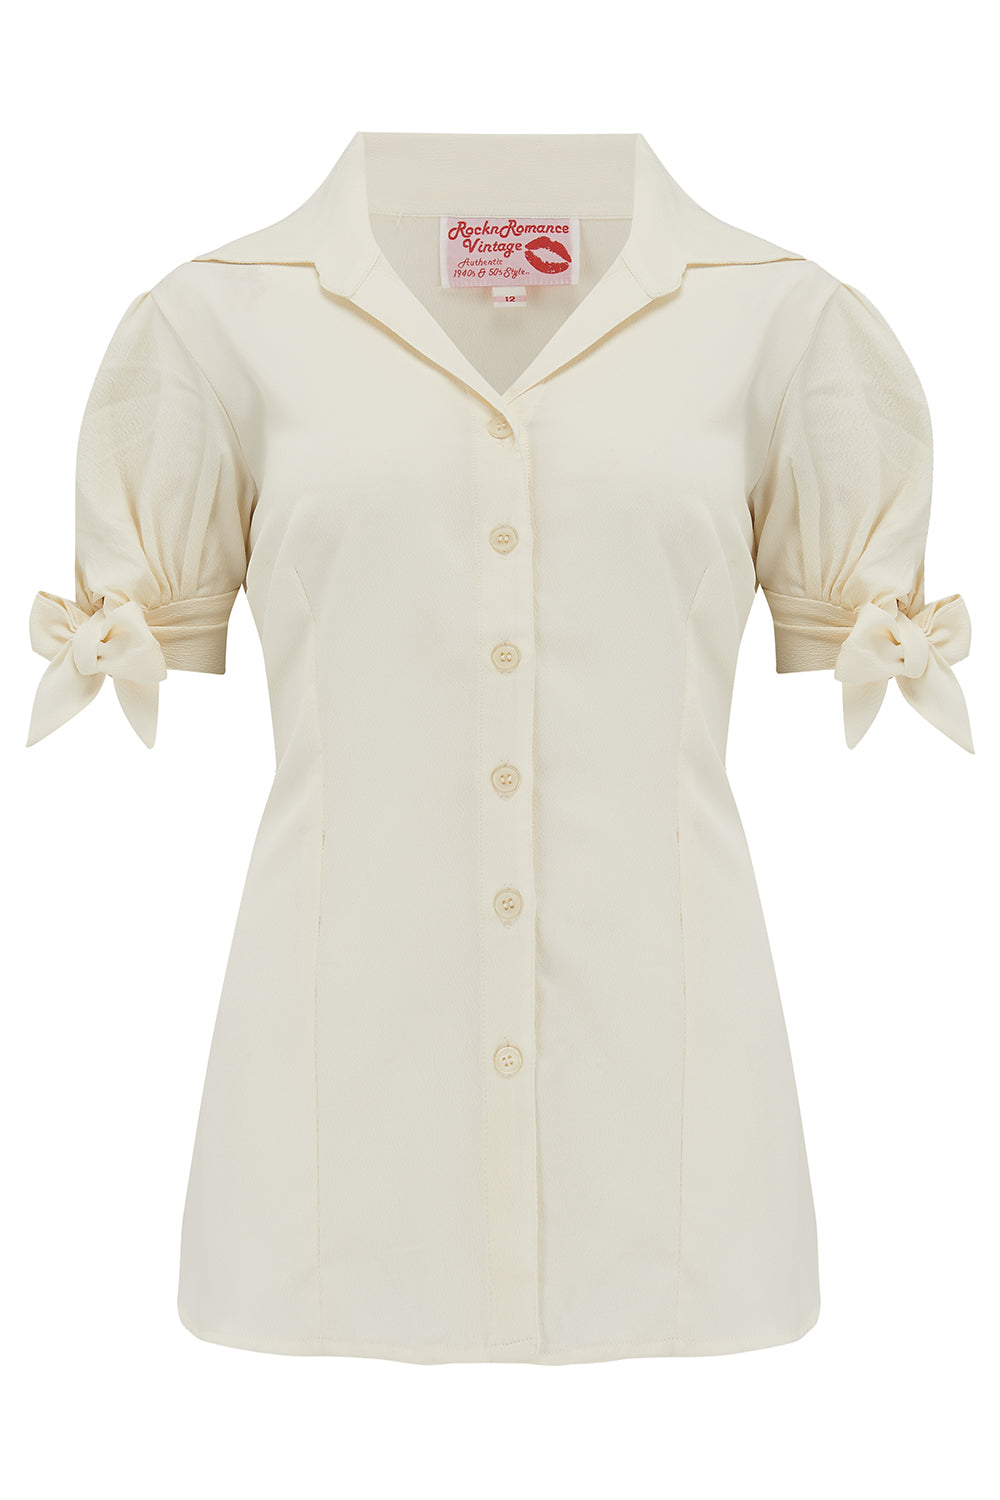 **Sample Sale** The "Jane" Blouse in Solid Antique White, True & Authentic 1950s Vintage Style - True and authentic vintage style clothing, inspired by the Classic styles of CC41 , WW2 and the fun 1950s RocknRoll era, for everyday wear plus events like Goodwood Revival, Twinwood Festival and Viva Las Vegas Rockabilly Weekend Rock n Romance Rock n Romance